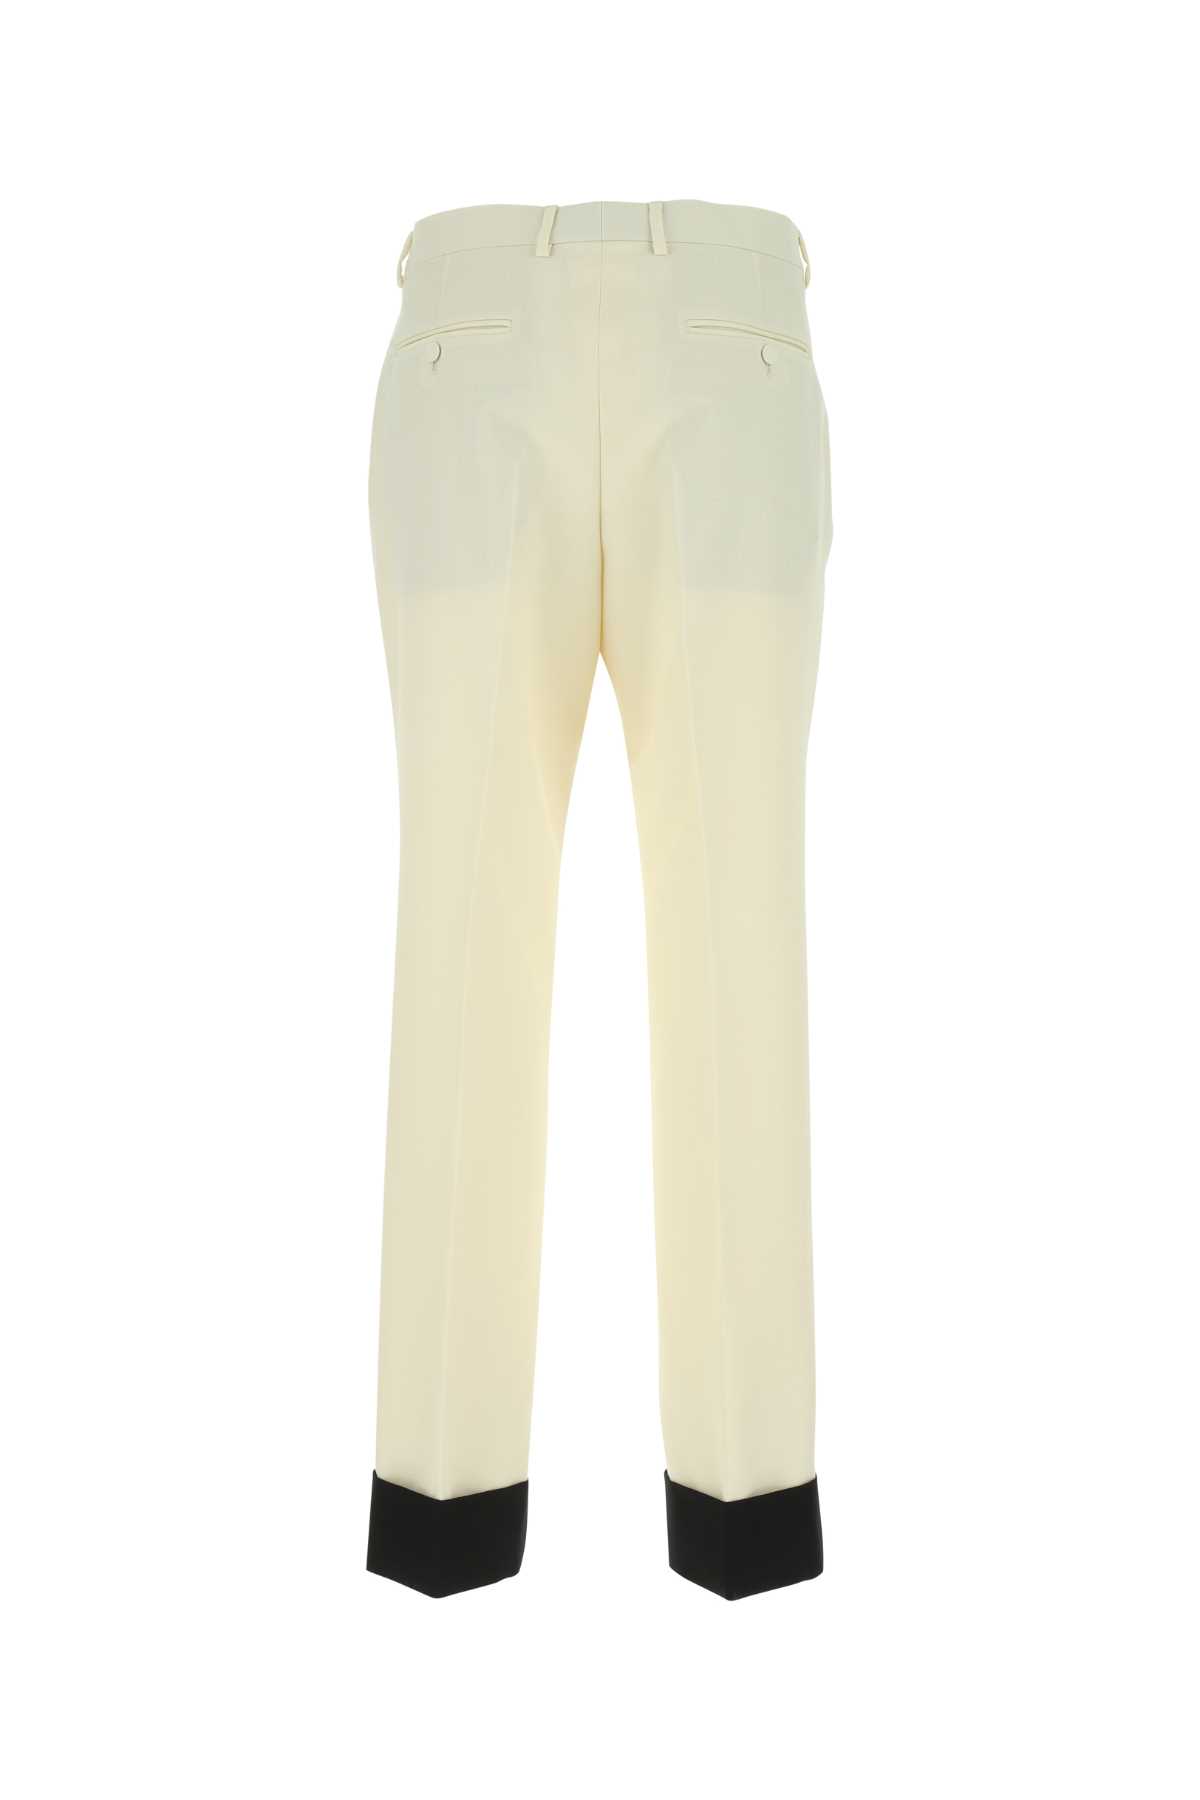 Gucci Ivory Wool Blend Trouser In 9198